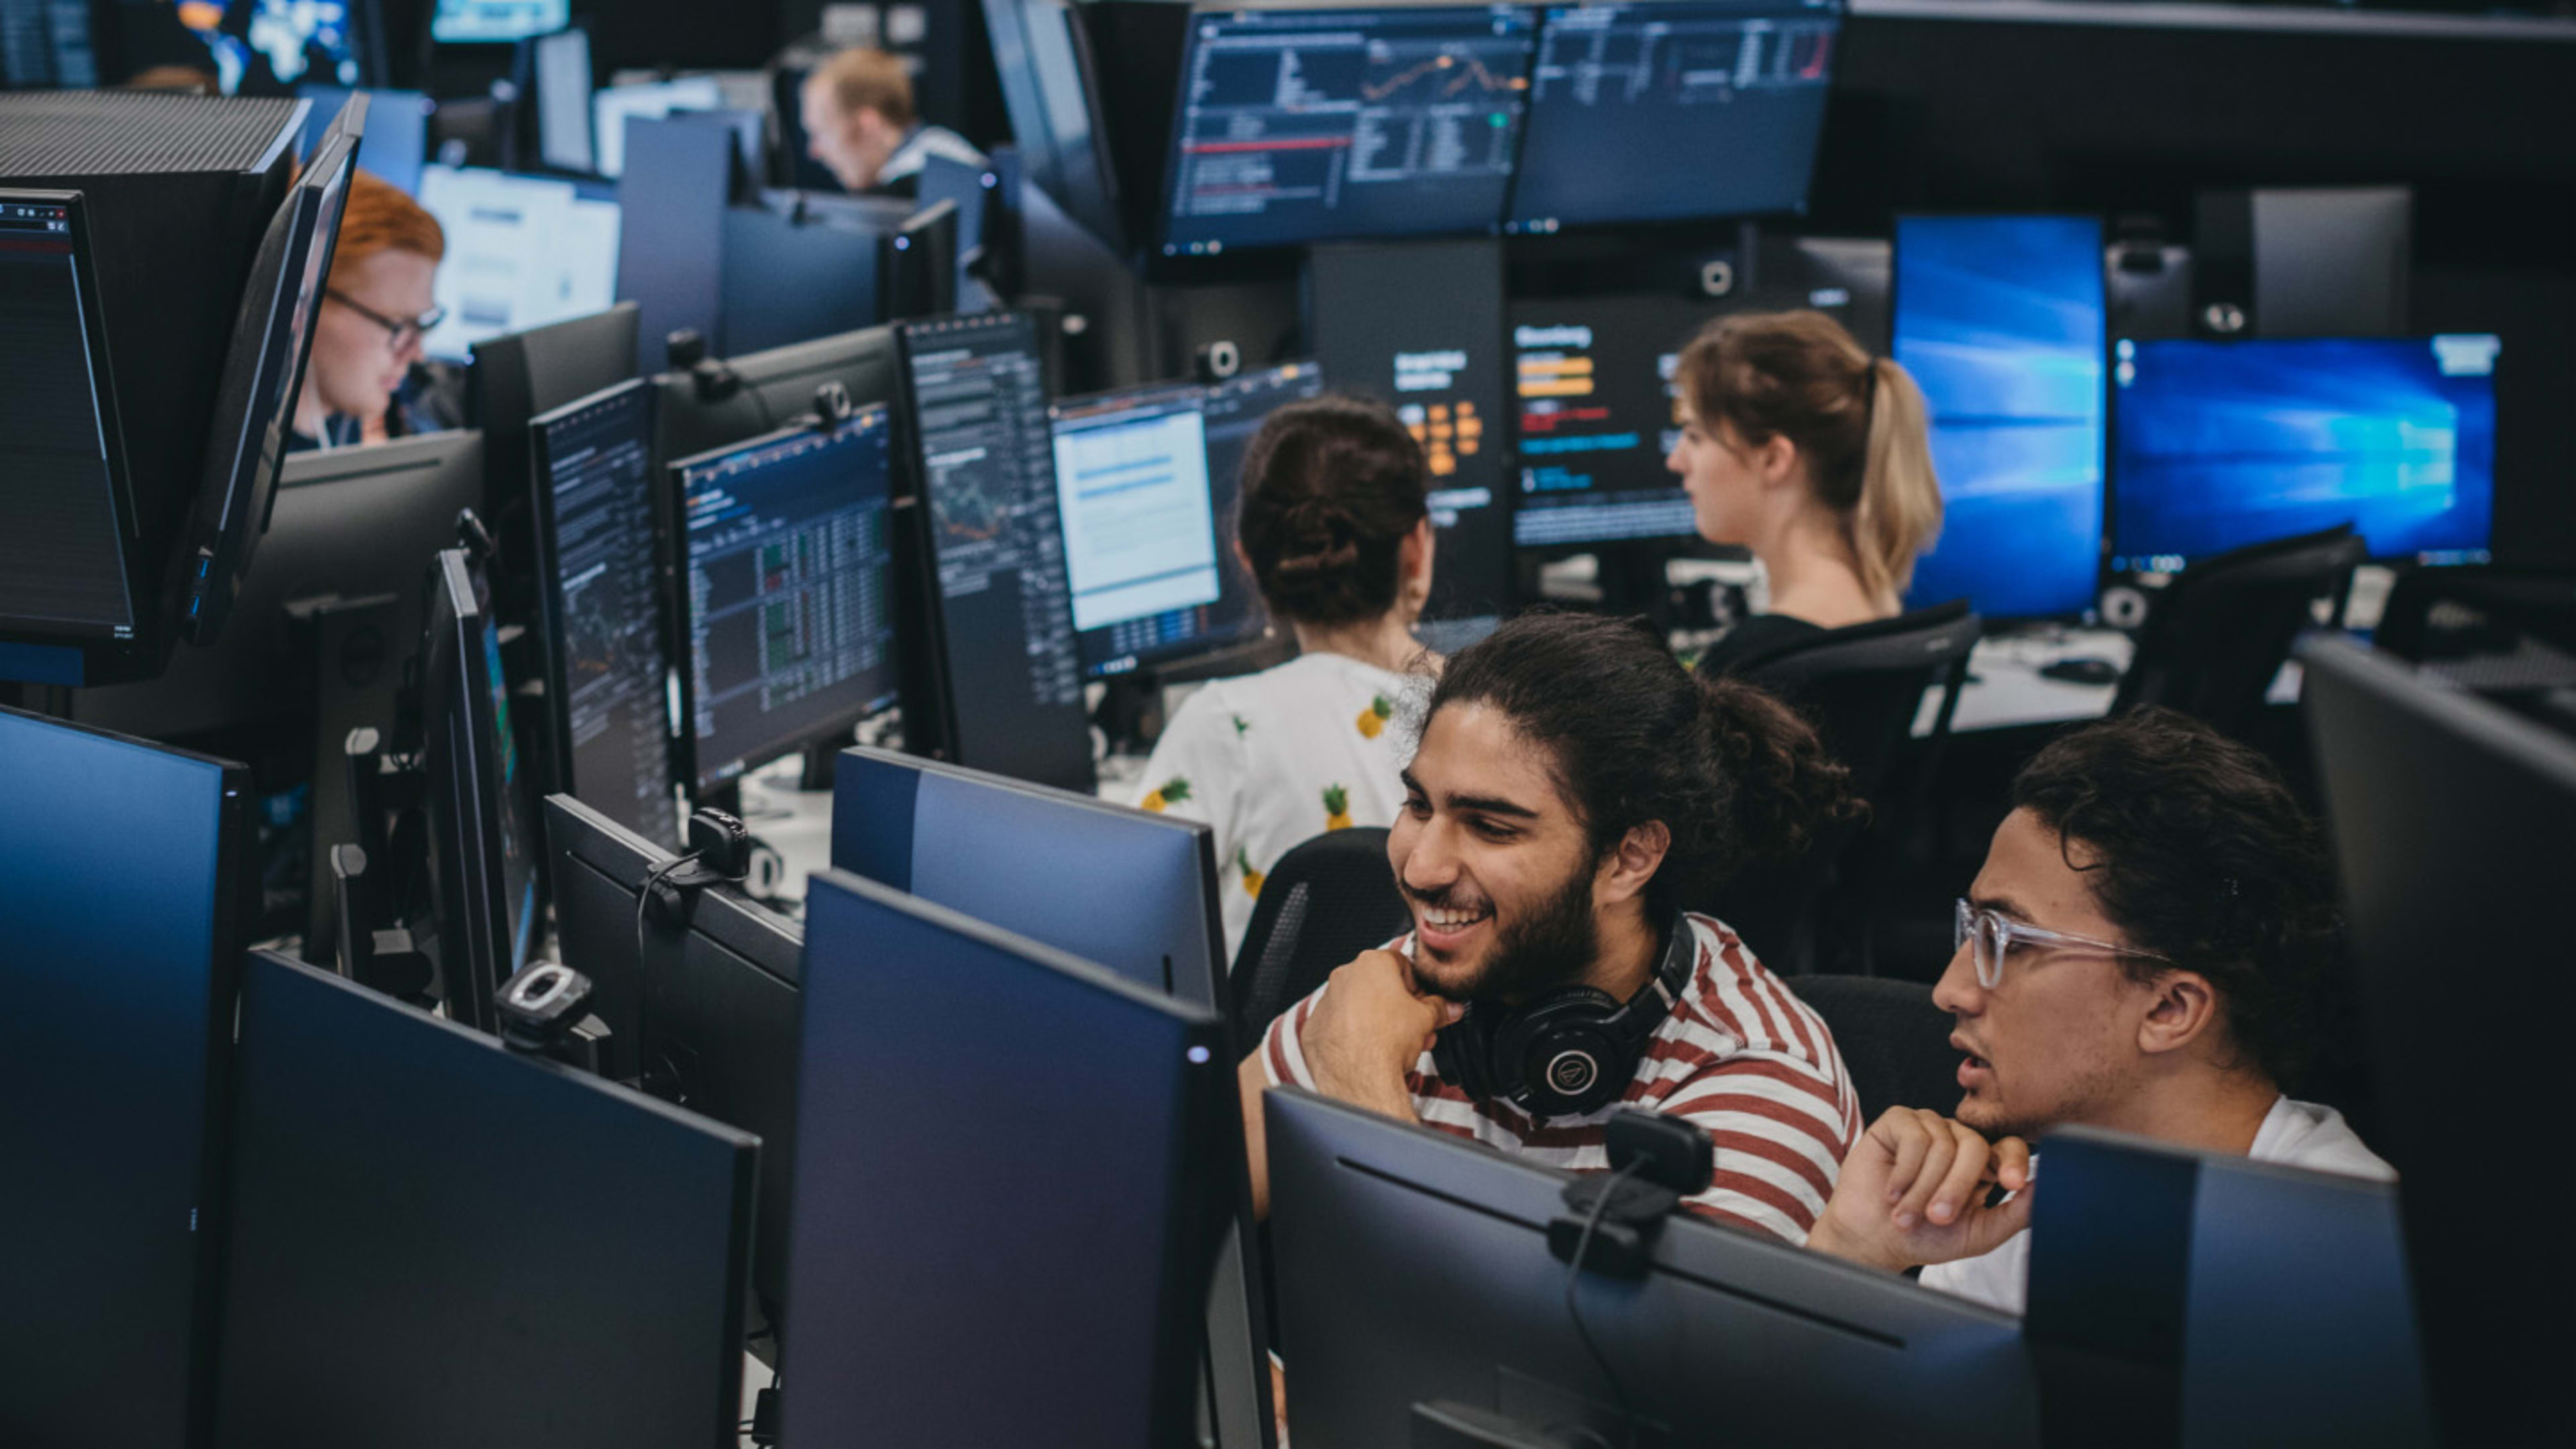 Students in business trading room